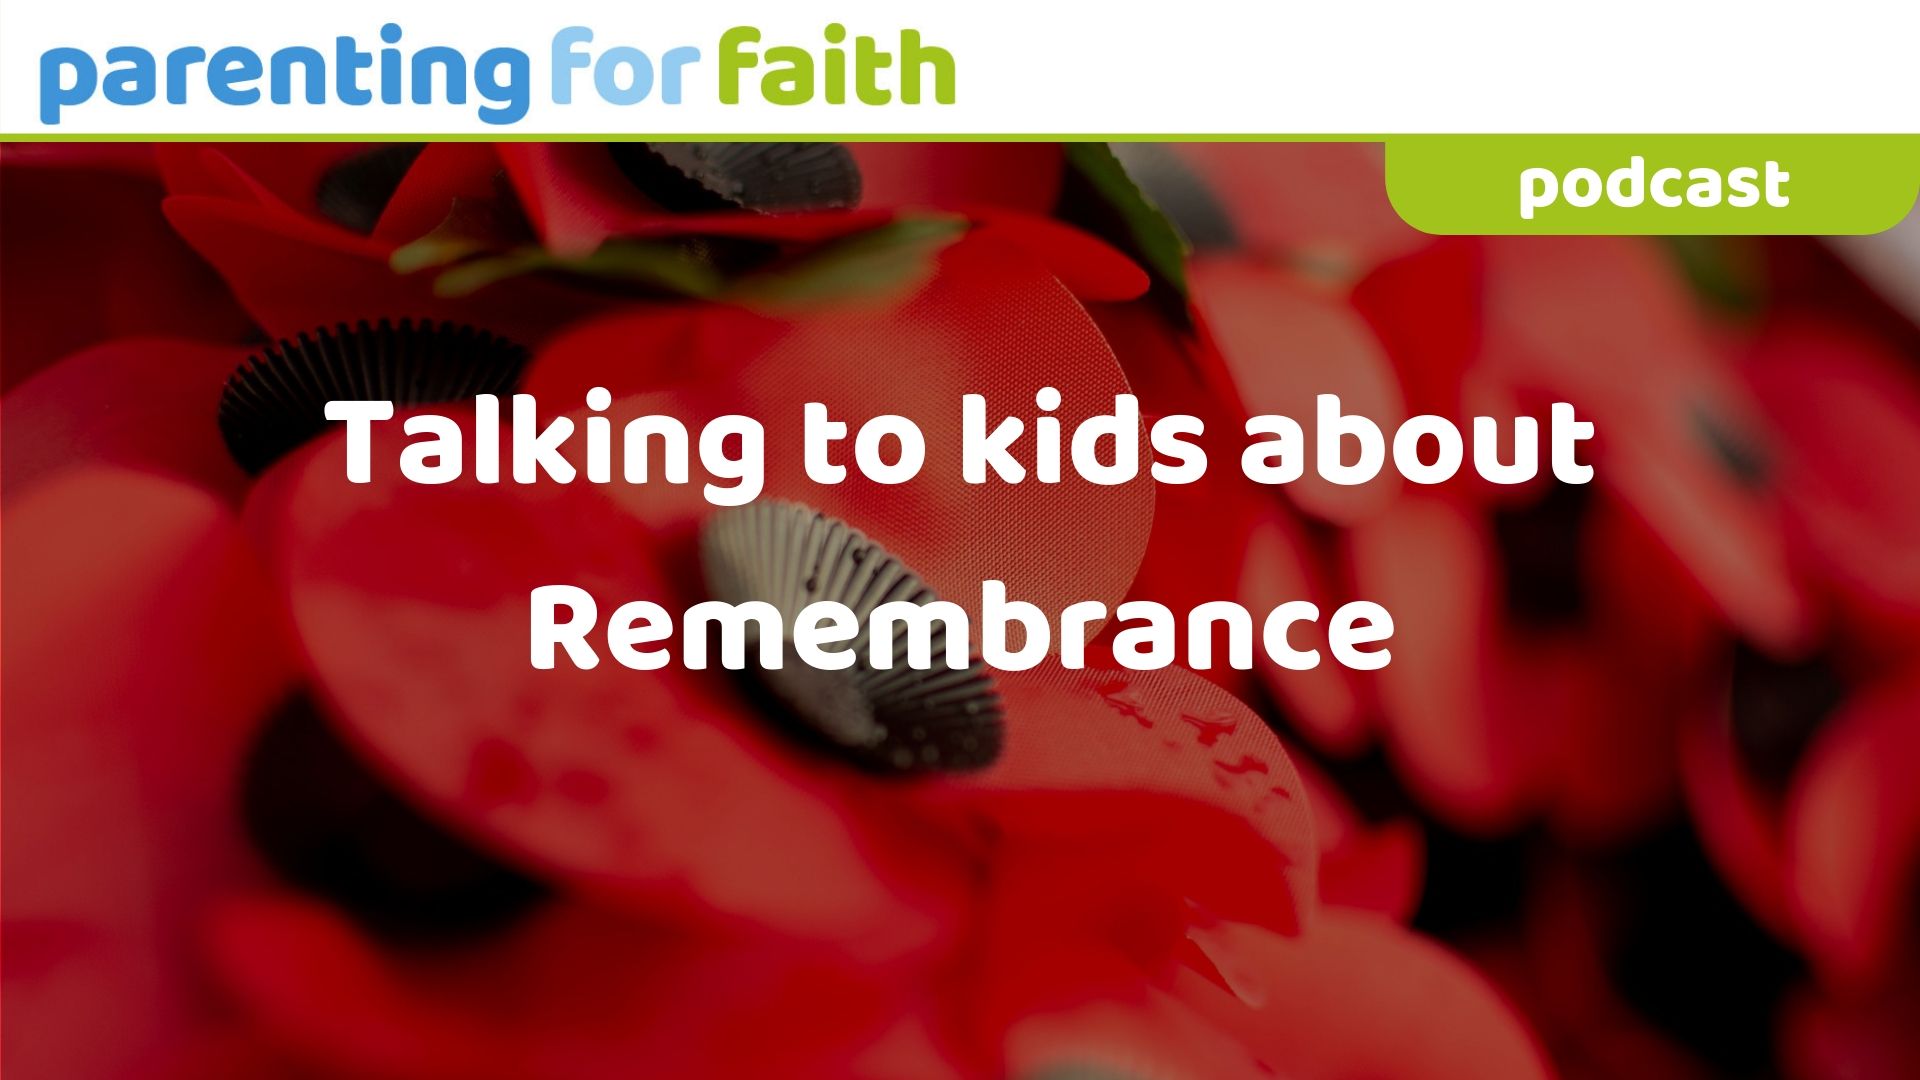 Talking to kids about remembrance OG post images 1920 x 1080 1